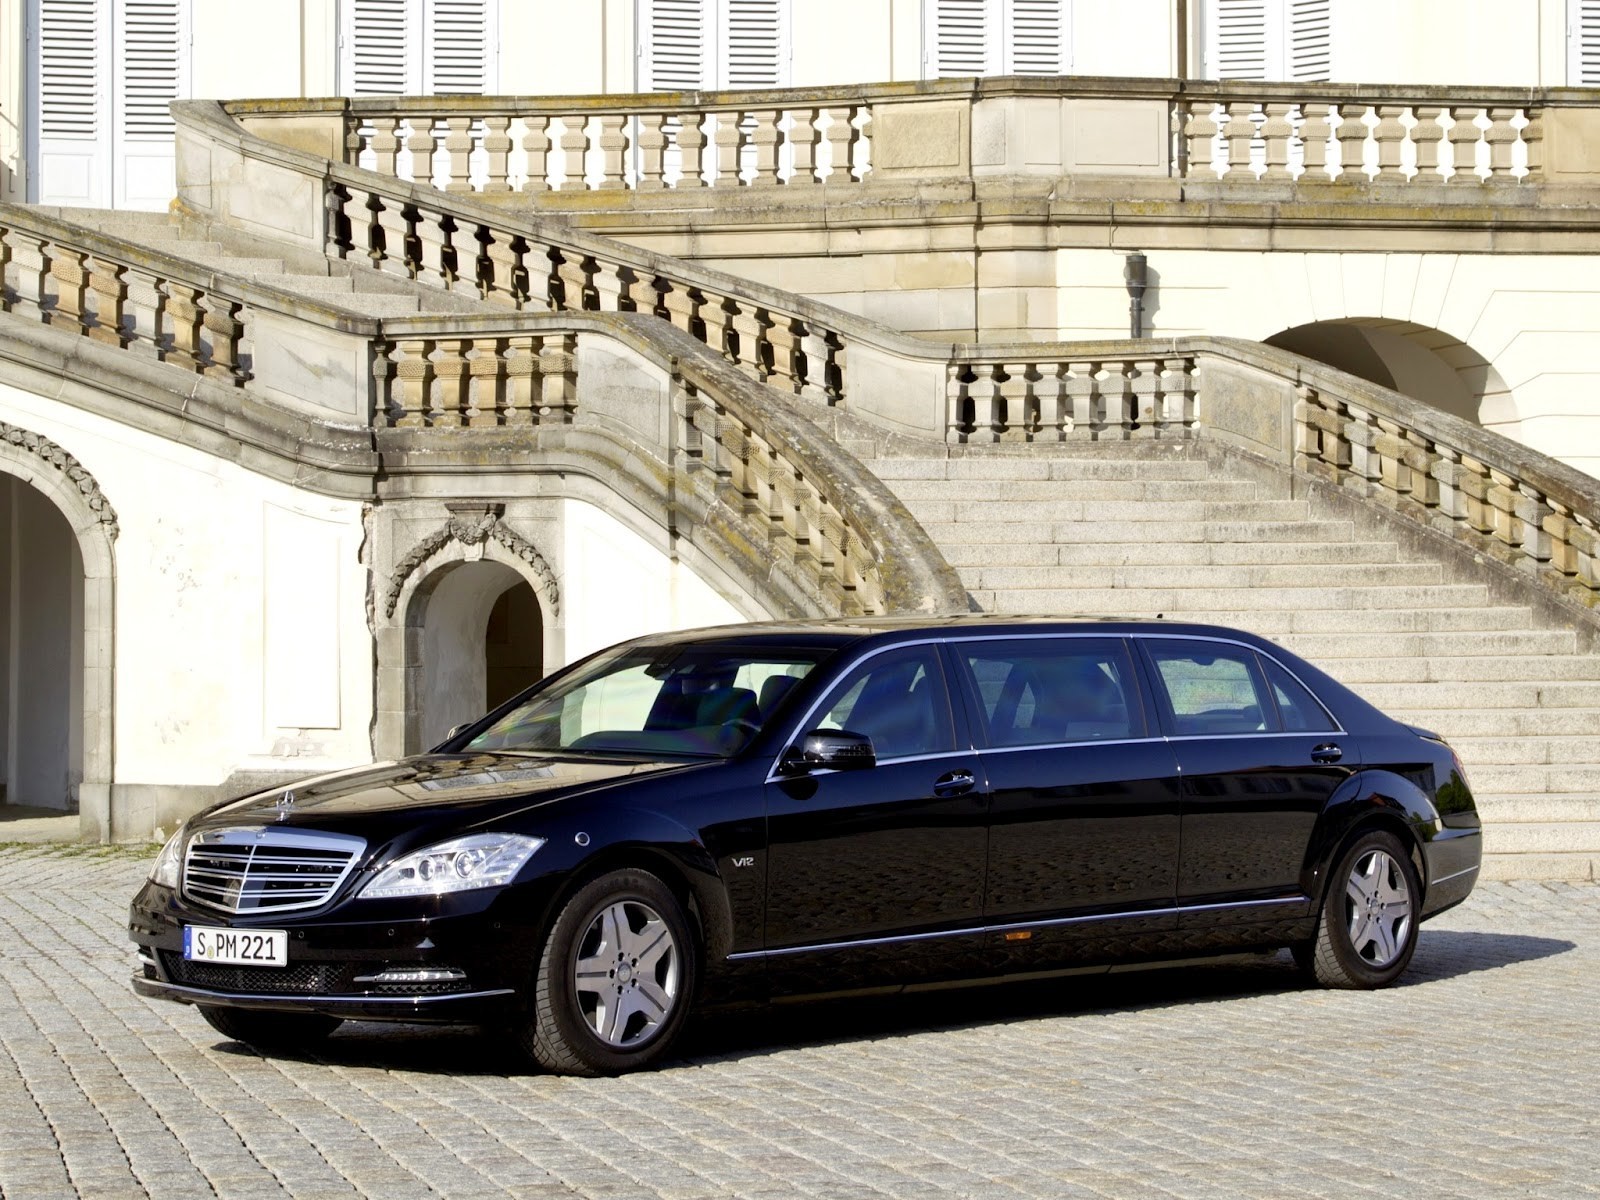 The Mercedes-Benz S-600 Pullman has already been shown at various car shows throughout the world. It is scheduled to be officially released to consumers in 2015. It was designed as the replacement to the Maybach 62. Maybach was a company owned by Mercedes-Benz that specialized in high luxury limousines. The Maybach line was pulled because it was unable to compete with Rolls Royce and Bentley. The S-600 Pullman is a 21-foot limo with amour plating capable of resisting gunfire and small explosives. Its price is set at a cool 1 million.